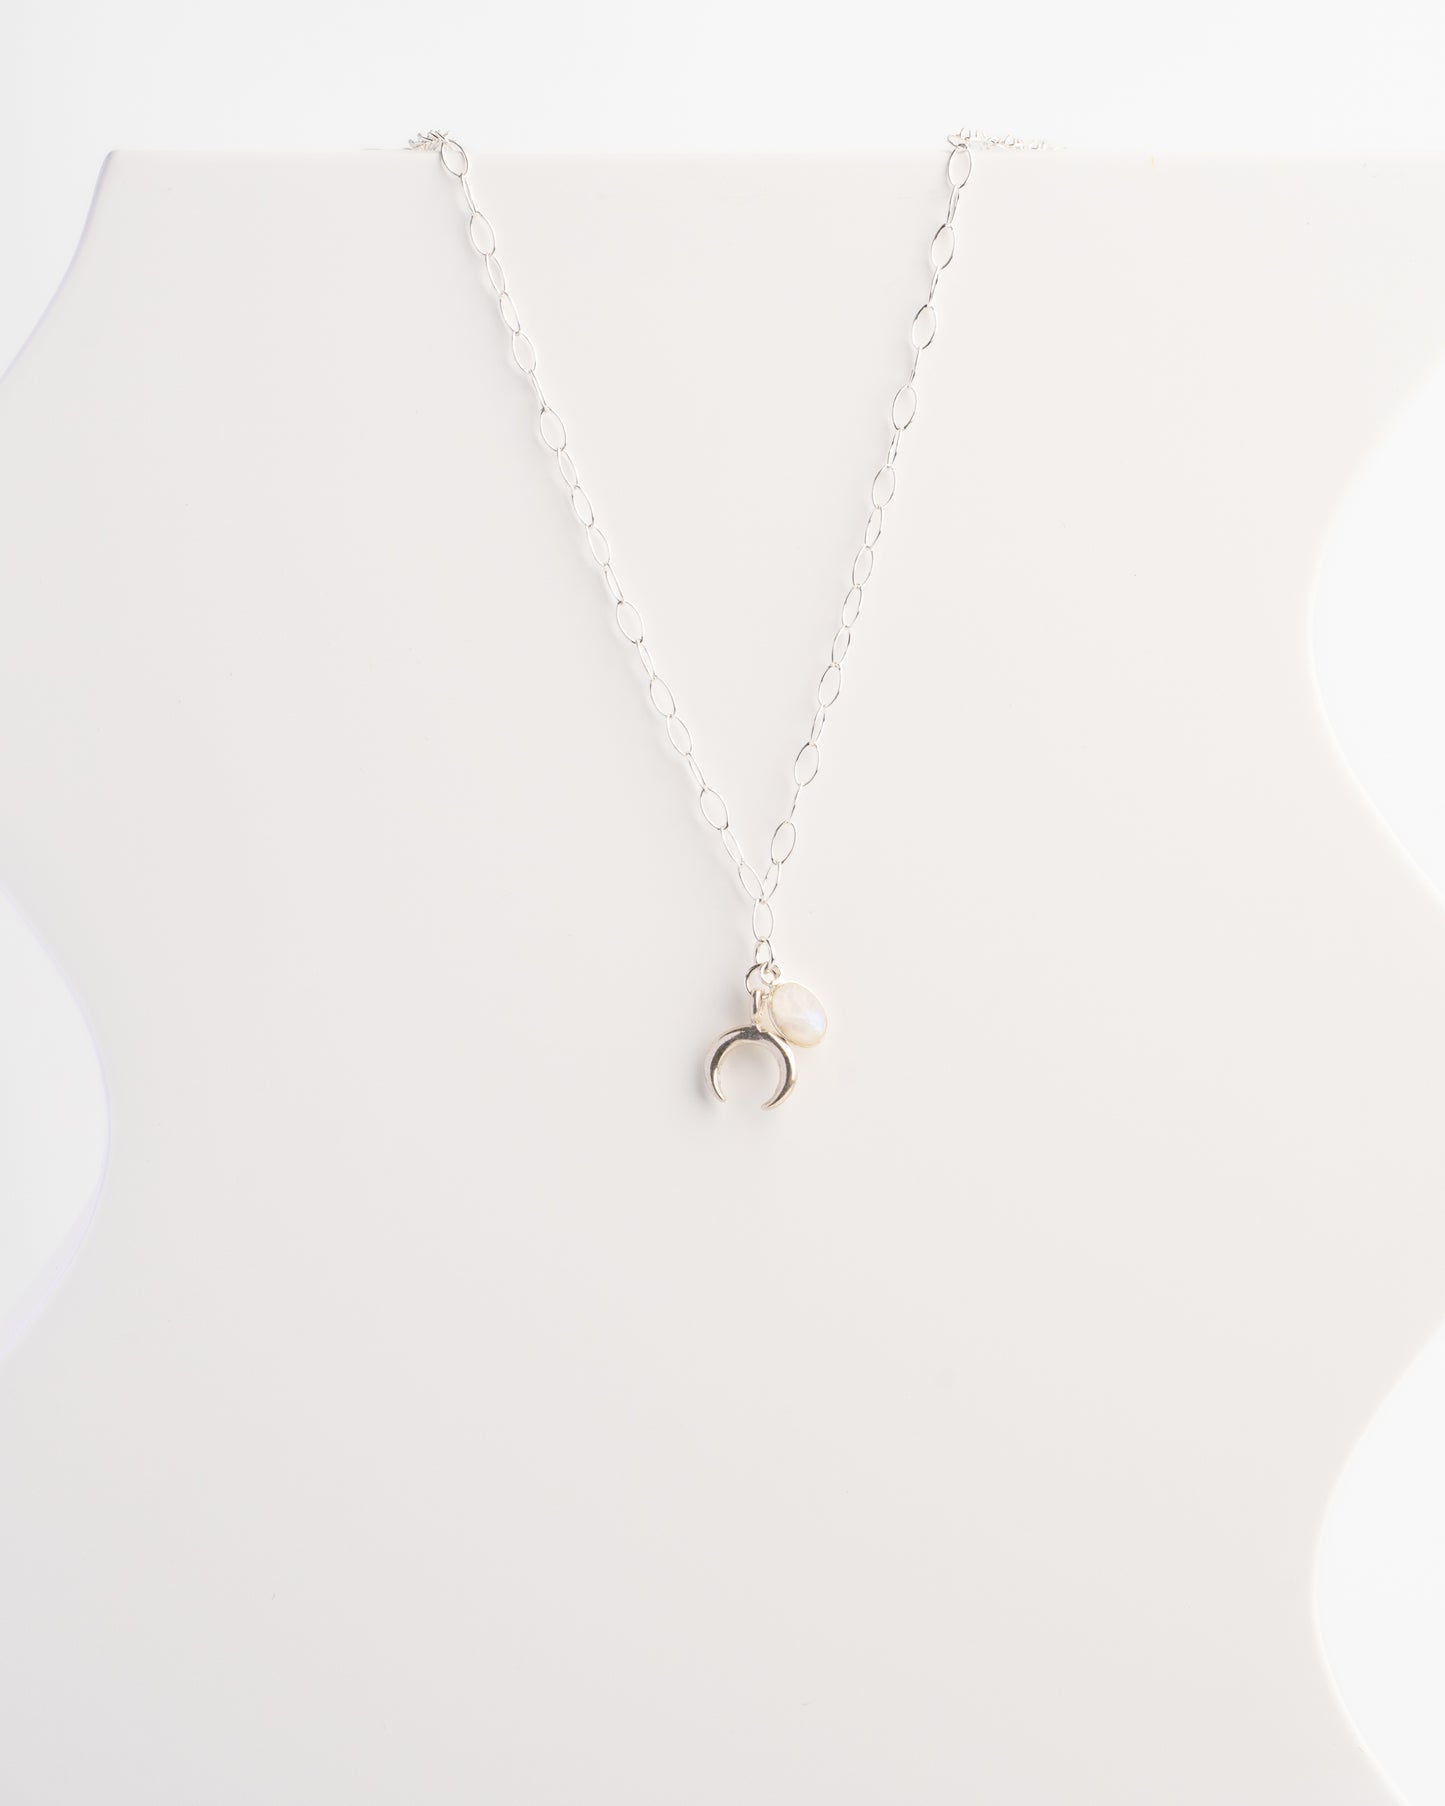 Moonchild necklace with Moonstone or Labradorite | perfect for layering your favorite necklaces and gemstones